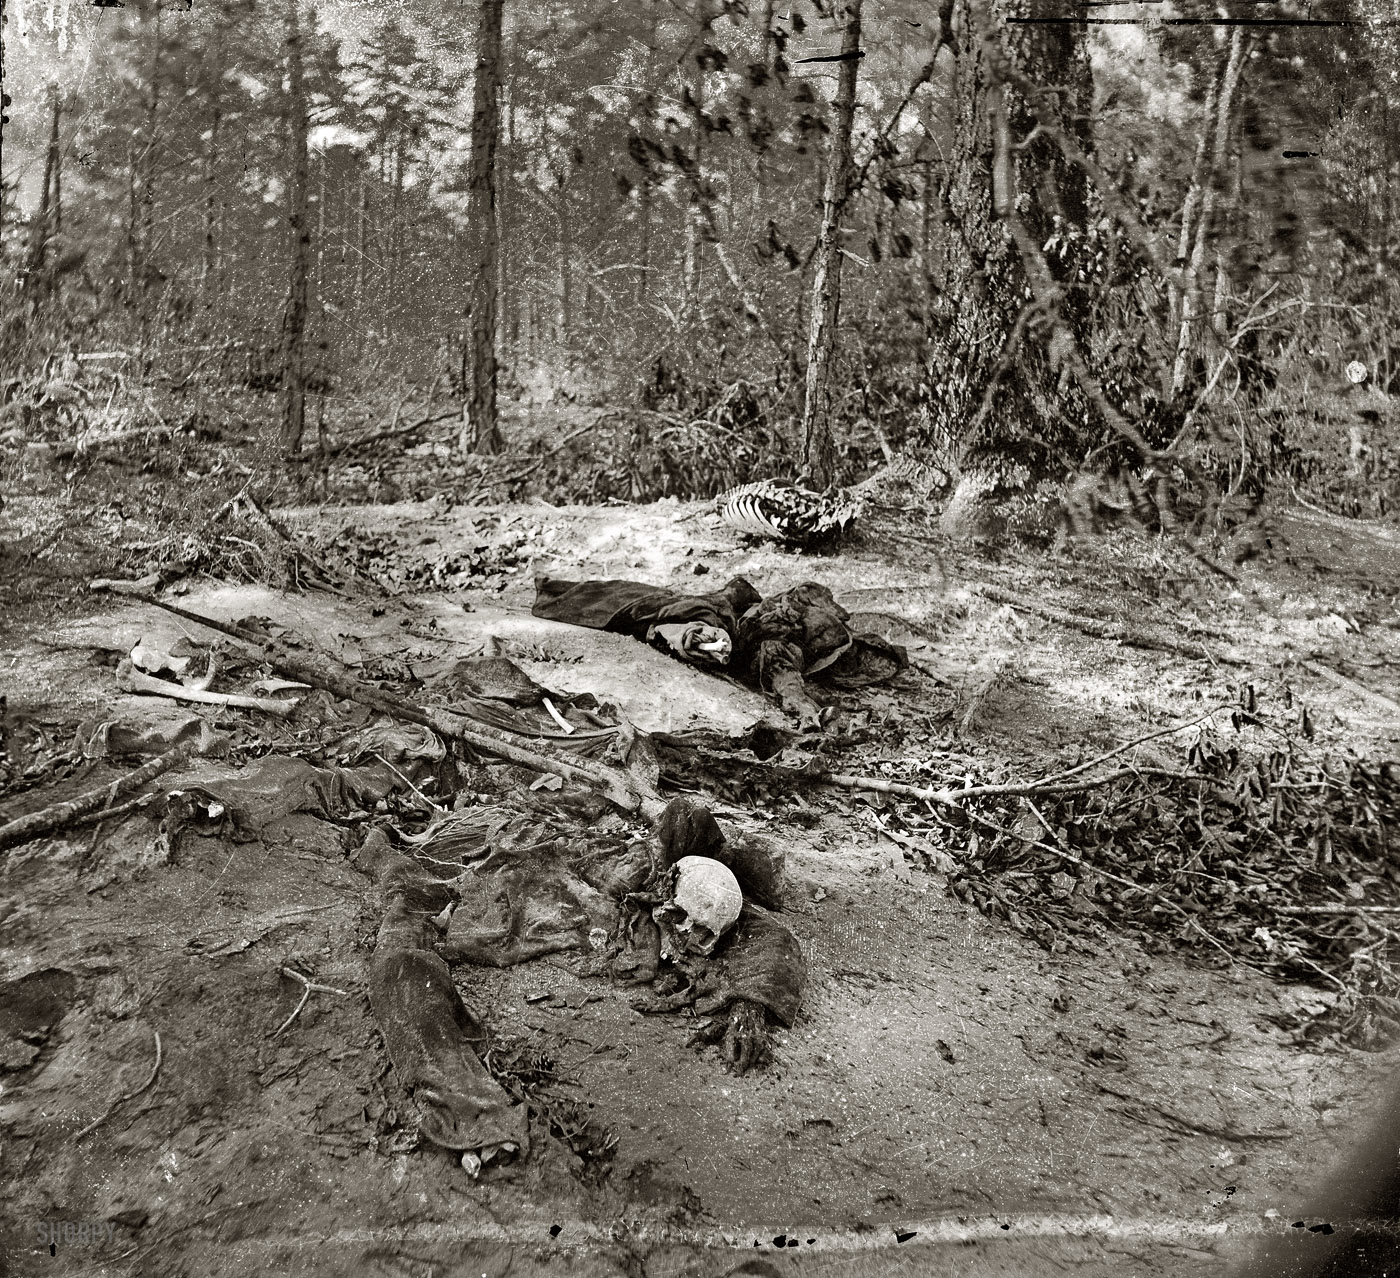 1865. "Cold Harbor, Virginia. Unburied dead on the battlefield of Gaines' Mill." Photographs from the main Eastern theater of war, the Peninsular Campaign, May-August 1862. Wet plate glass negative by John Reekie. View full size.